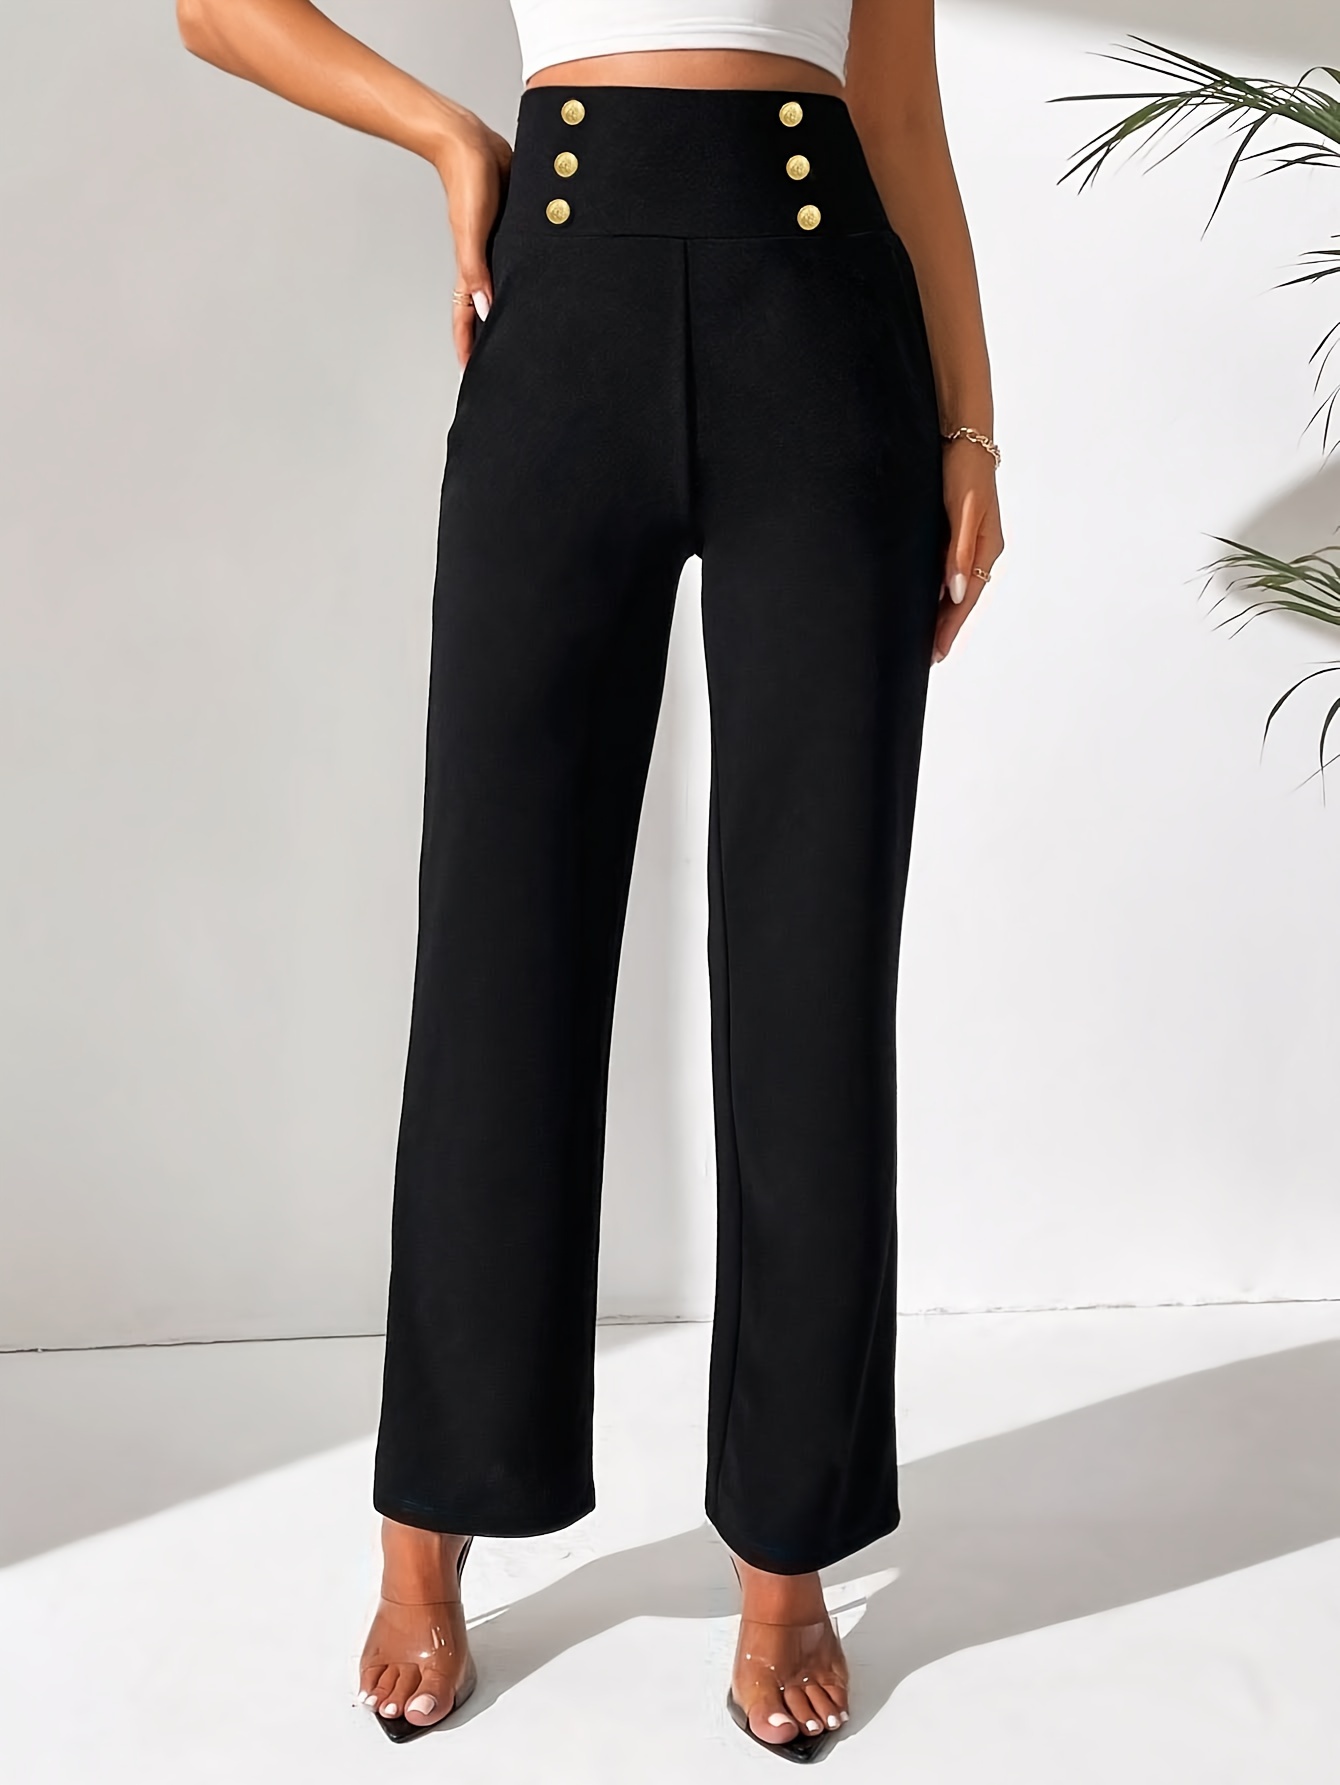 High Waisted Pants For Women